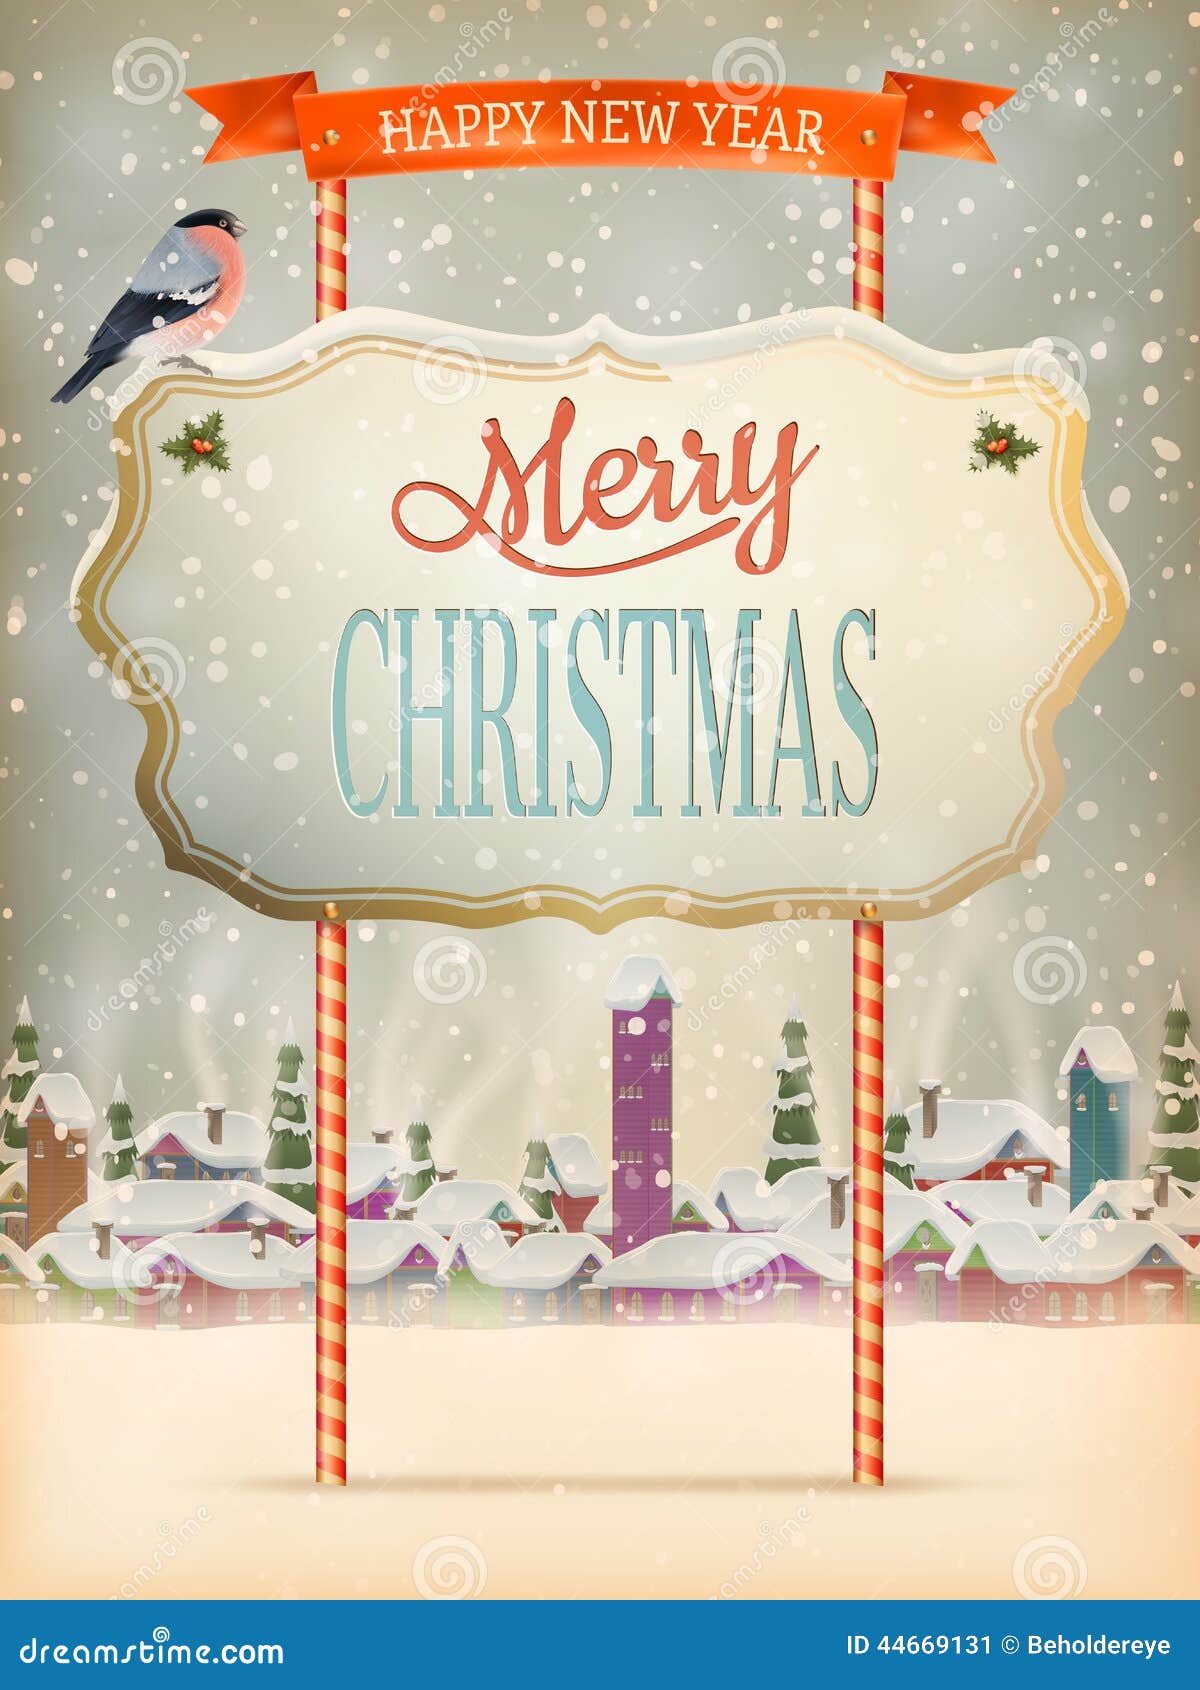 Christmas Vintage street with Signboard. EPS 10. Christmas greeting Calligraphy - Vintage street with Signboard. EPS 10 vector file included.